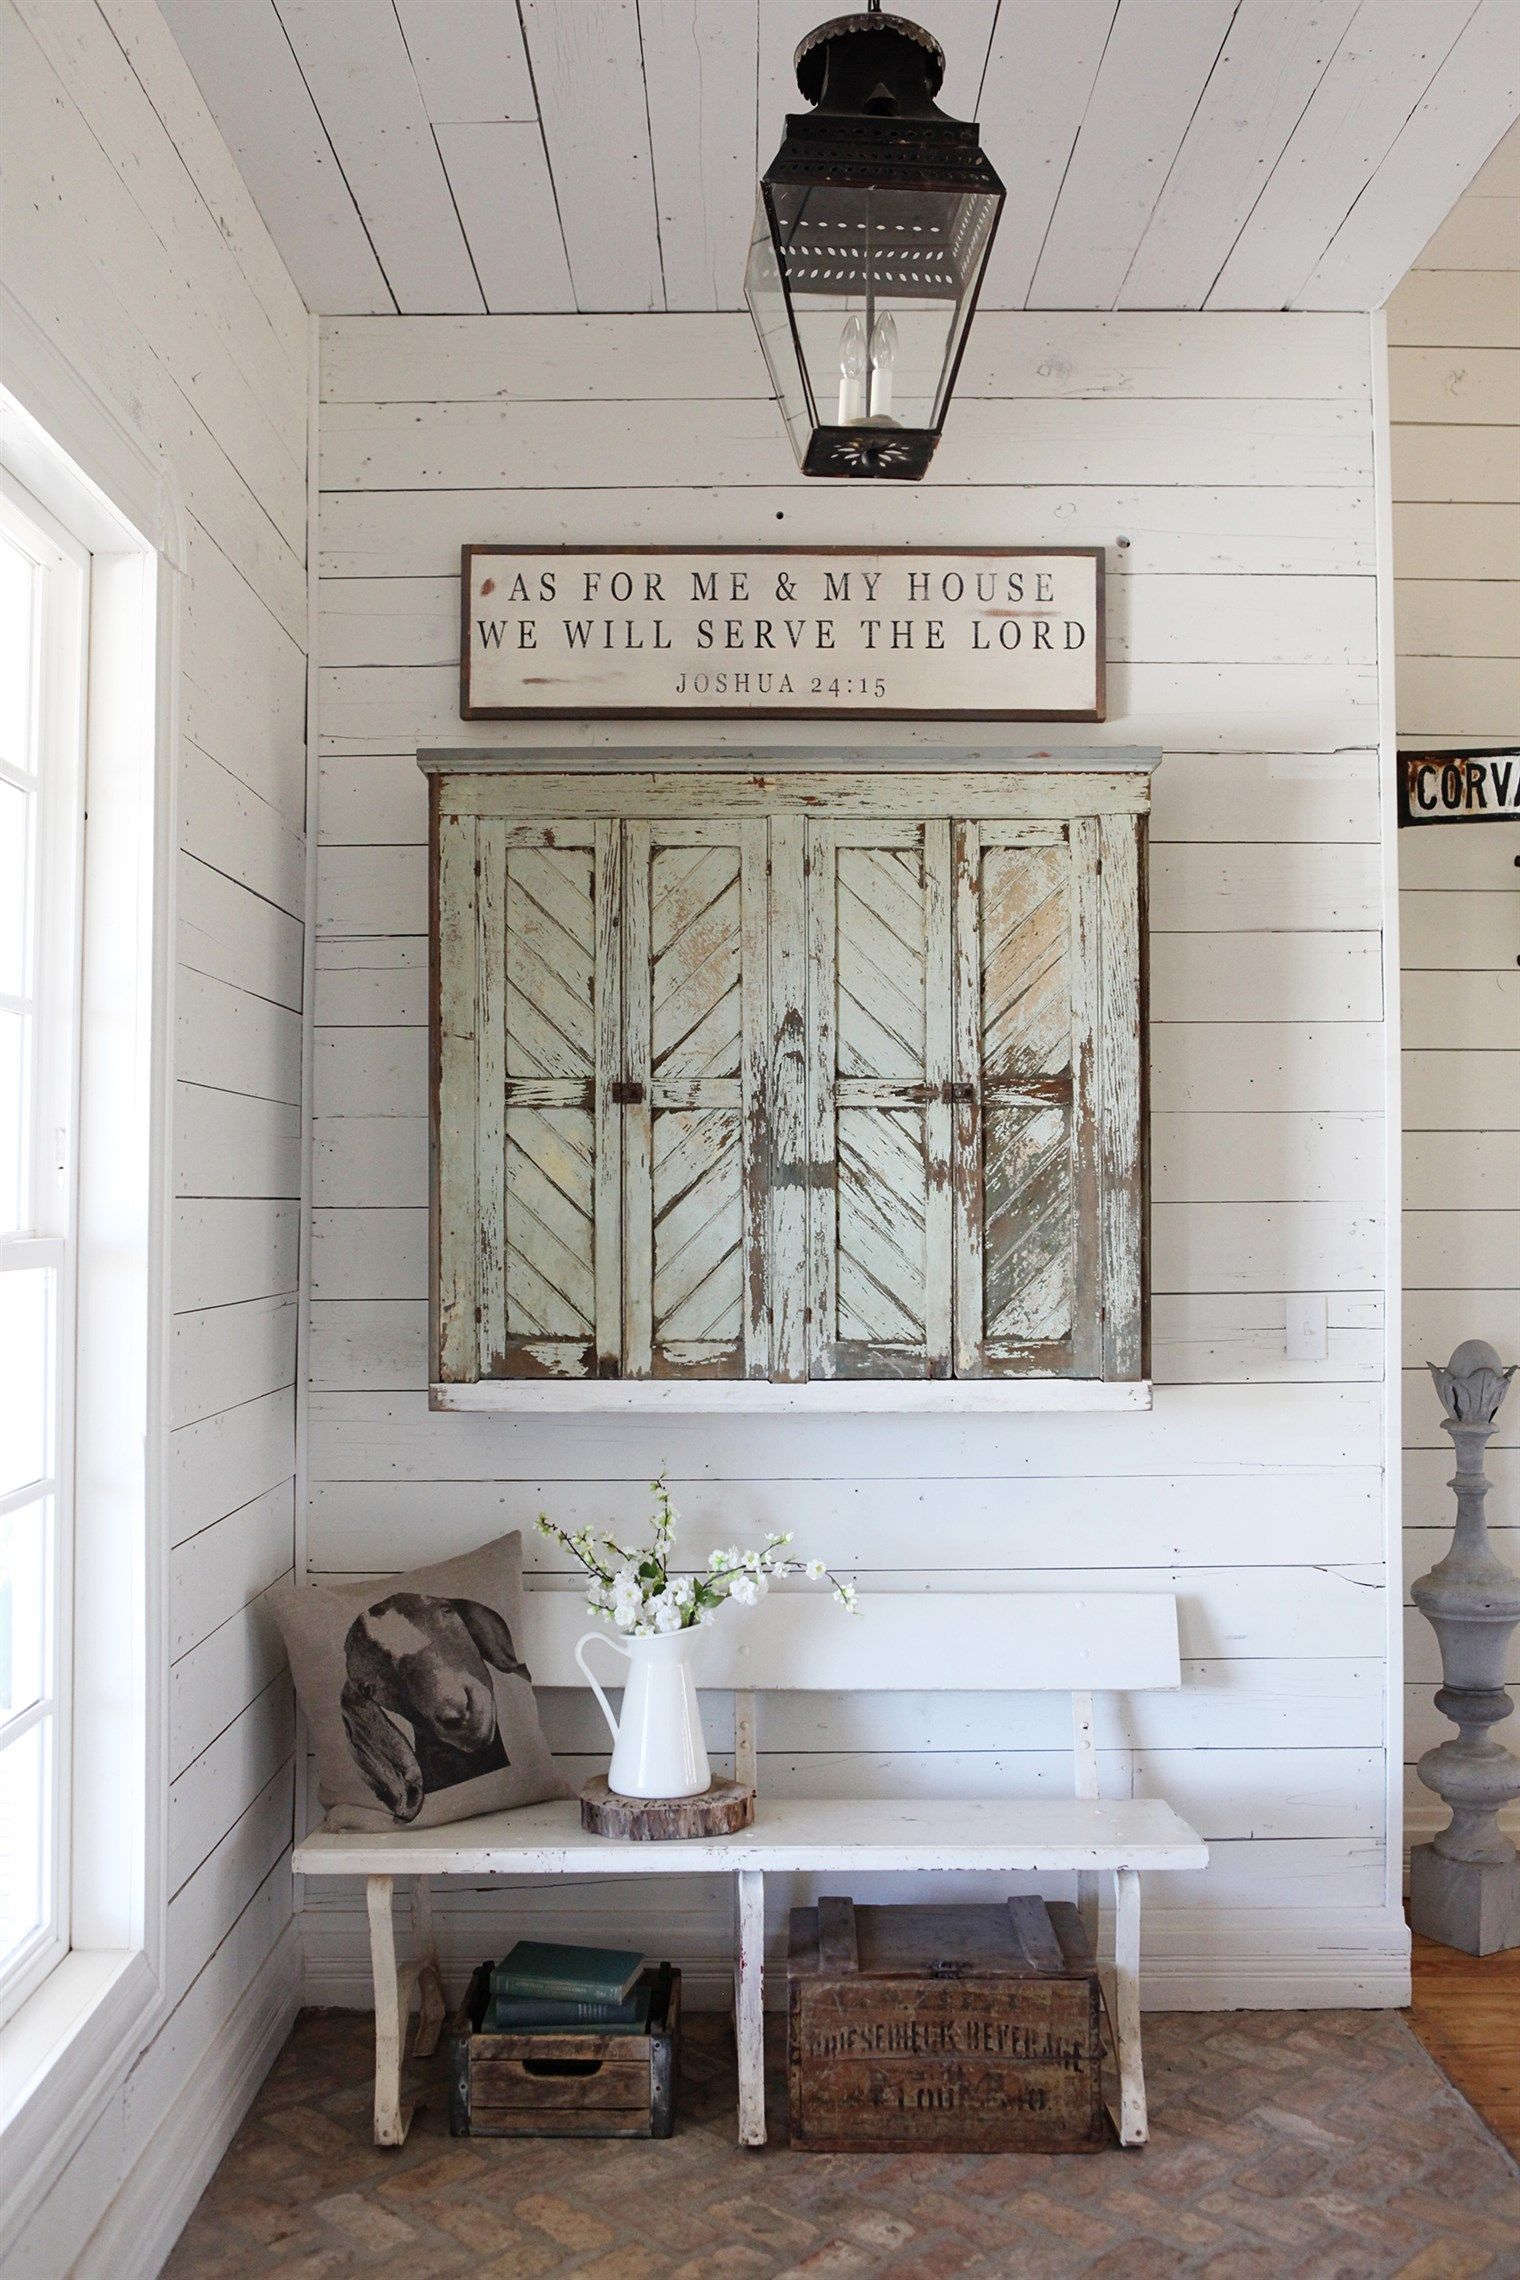 Tour Chip and Joanna Gaines' very own 'Fixer Upper' farmhouse - Tour Chip and Joanna Gaines' very own 'Fixer Upper' farmhouse -   16 farmhouse wall decorations joanna gaines ideas